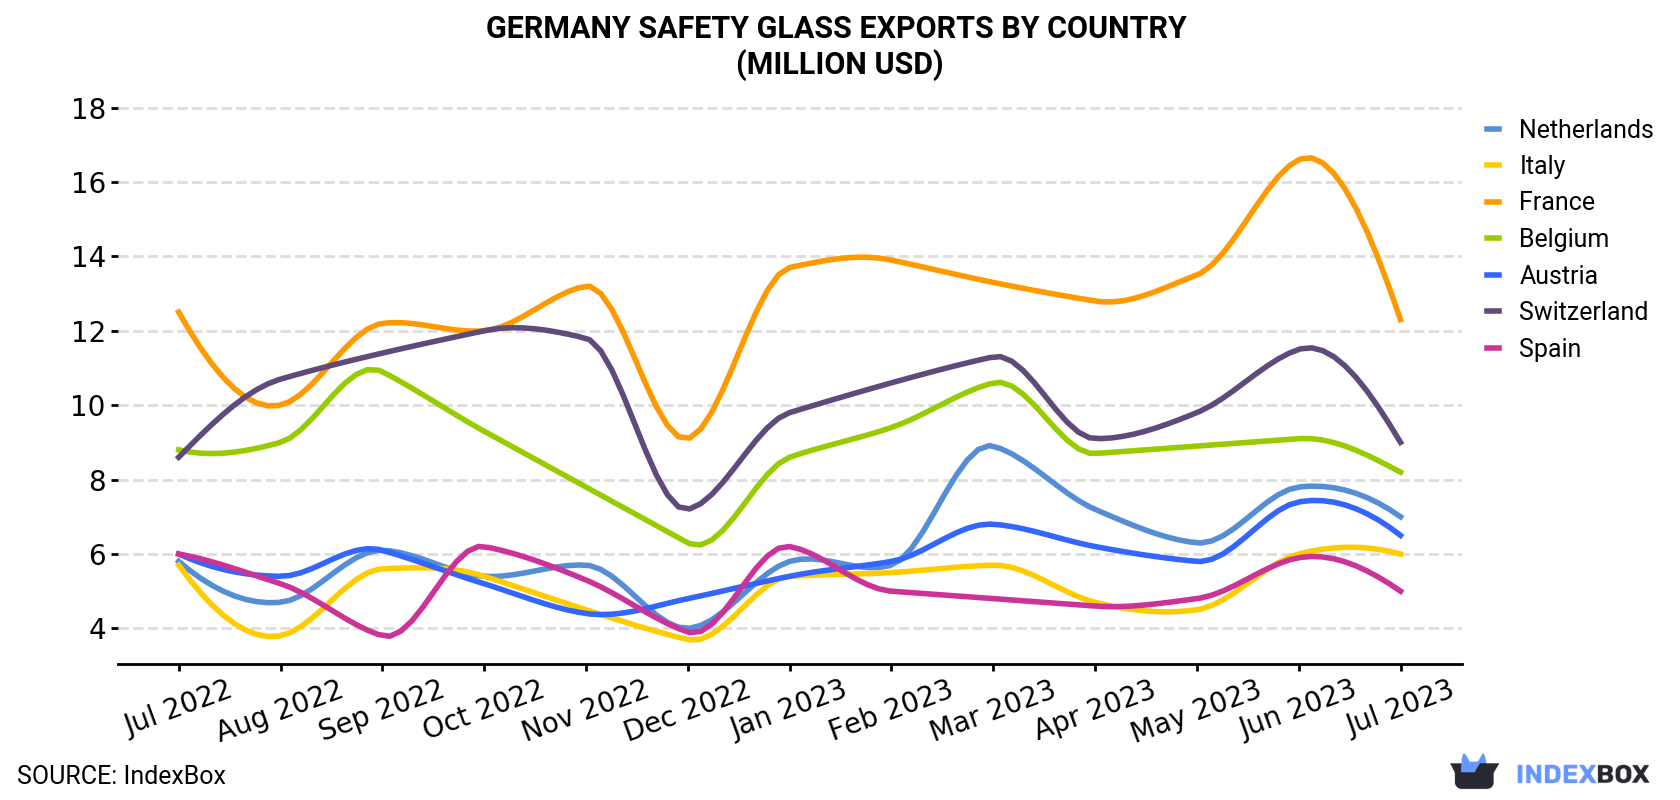 Germany Safety Glass Exports By Country (Million USD)